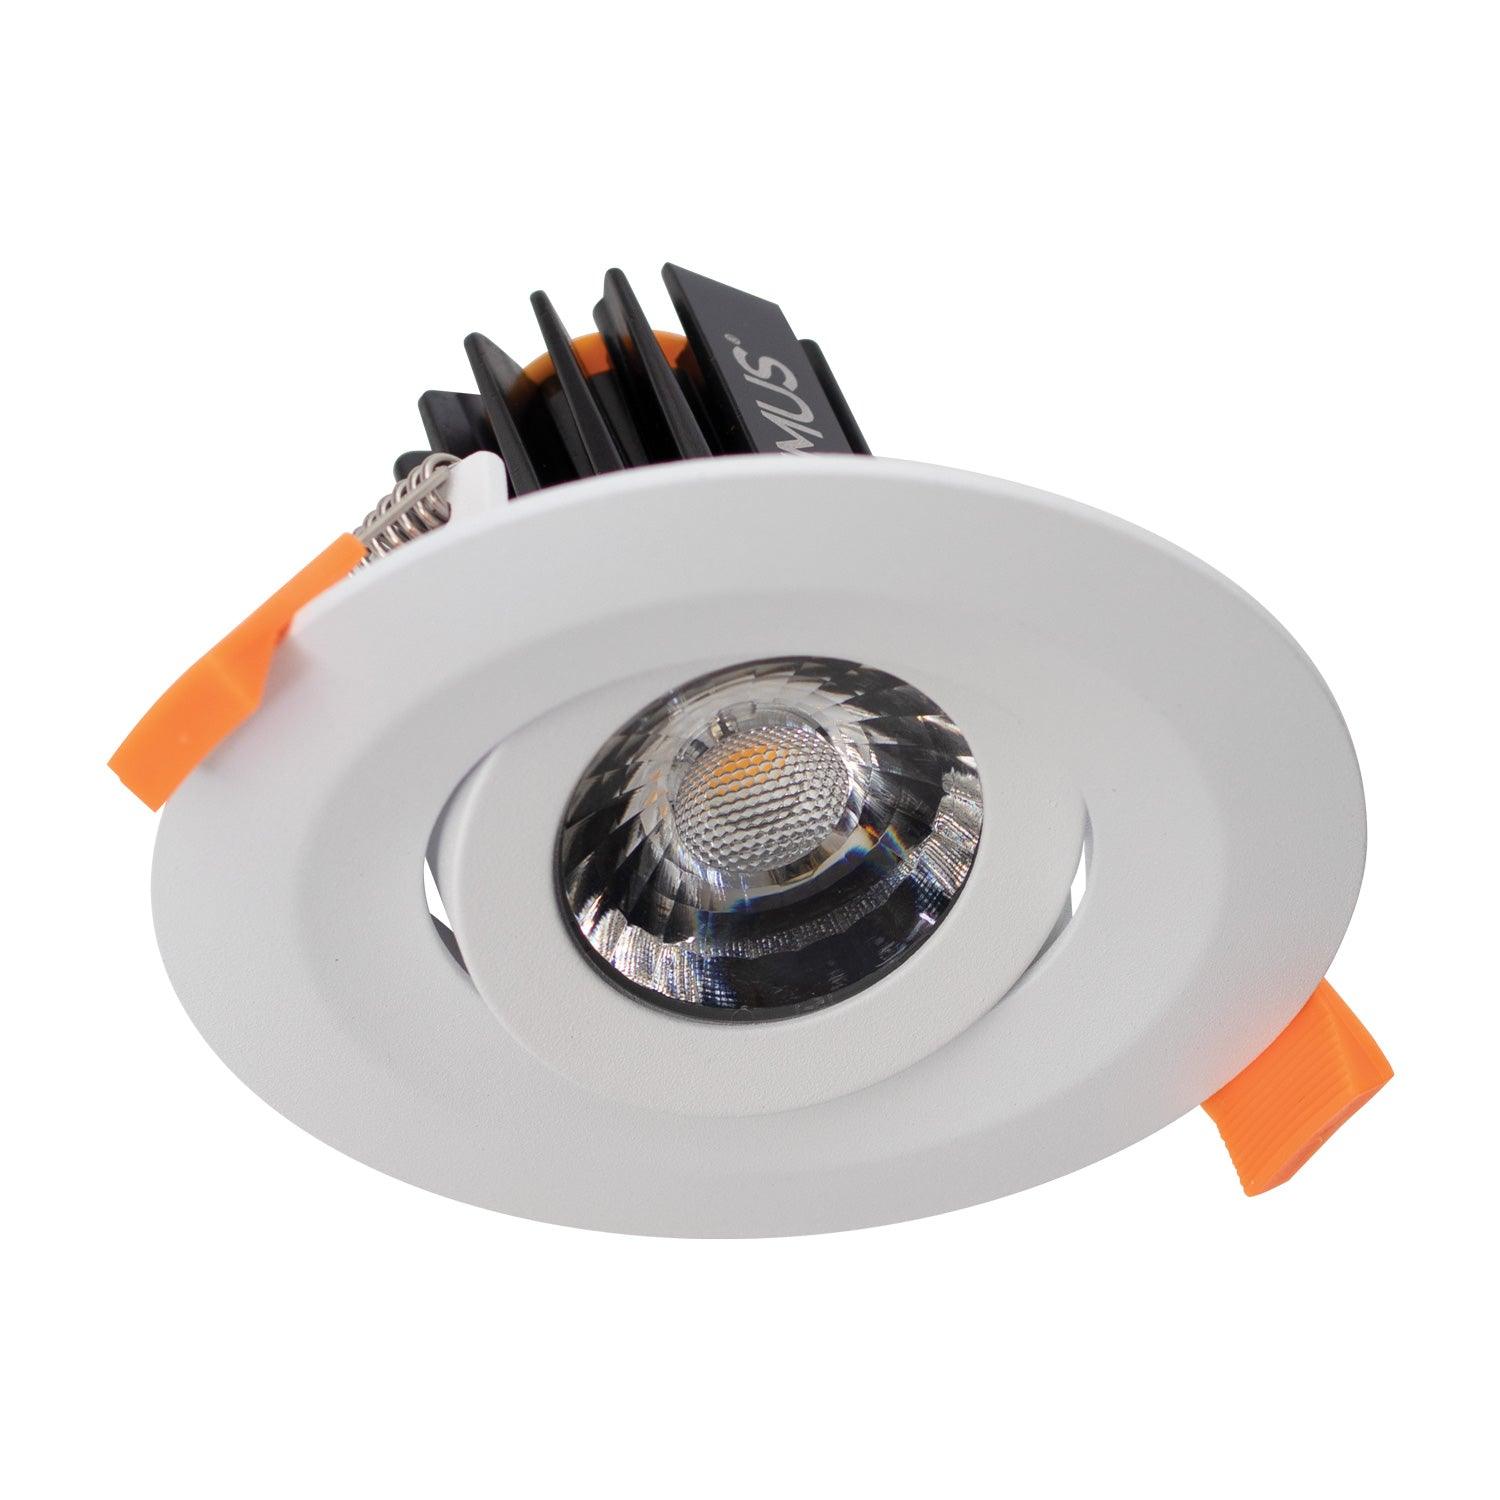 Domus Lighting LED Downlights WHITE Cell-9-5Cct-T90 - 9W Colour Switchable T90 Tiltable Led Downlight 240V - Quinto Lights-For-You 21678